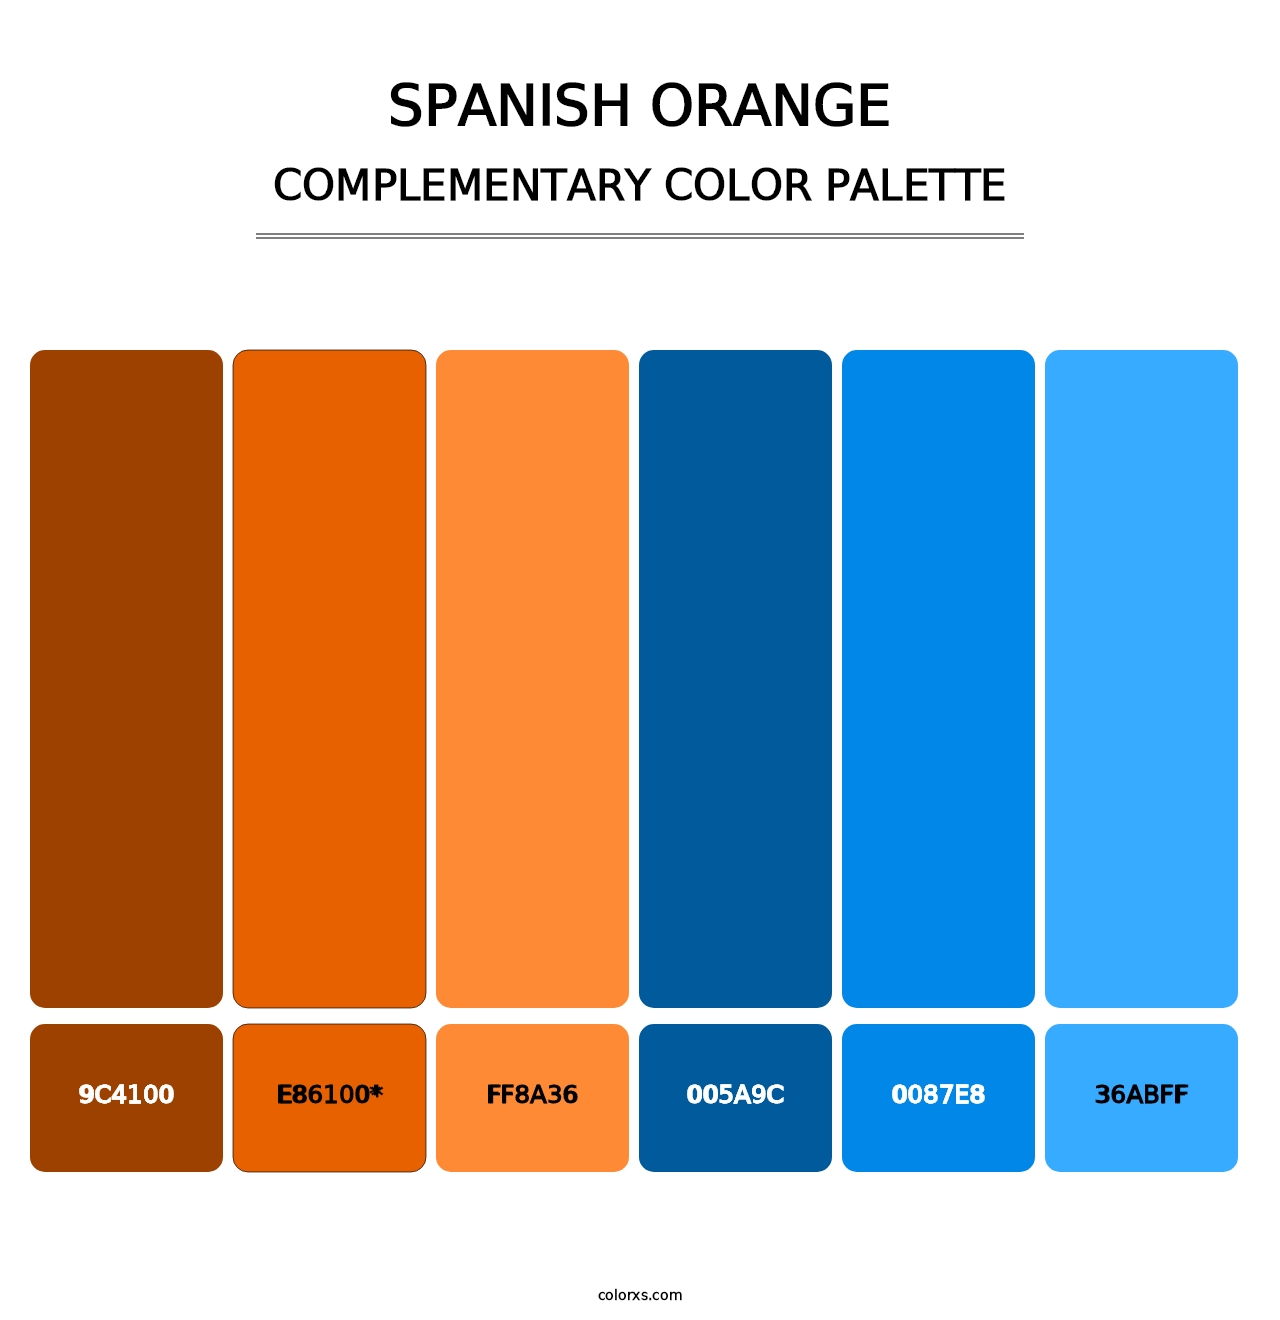 Spanish Orange - Complementary Color Palette